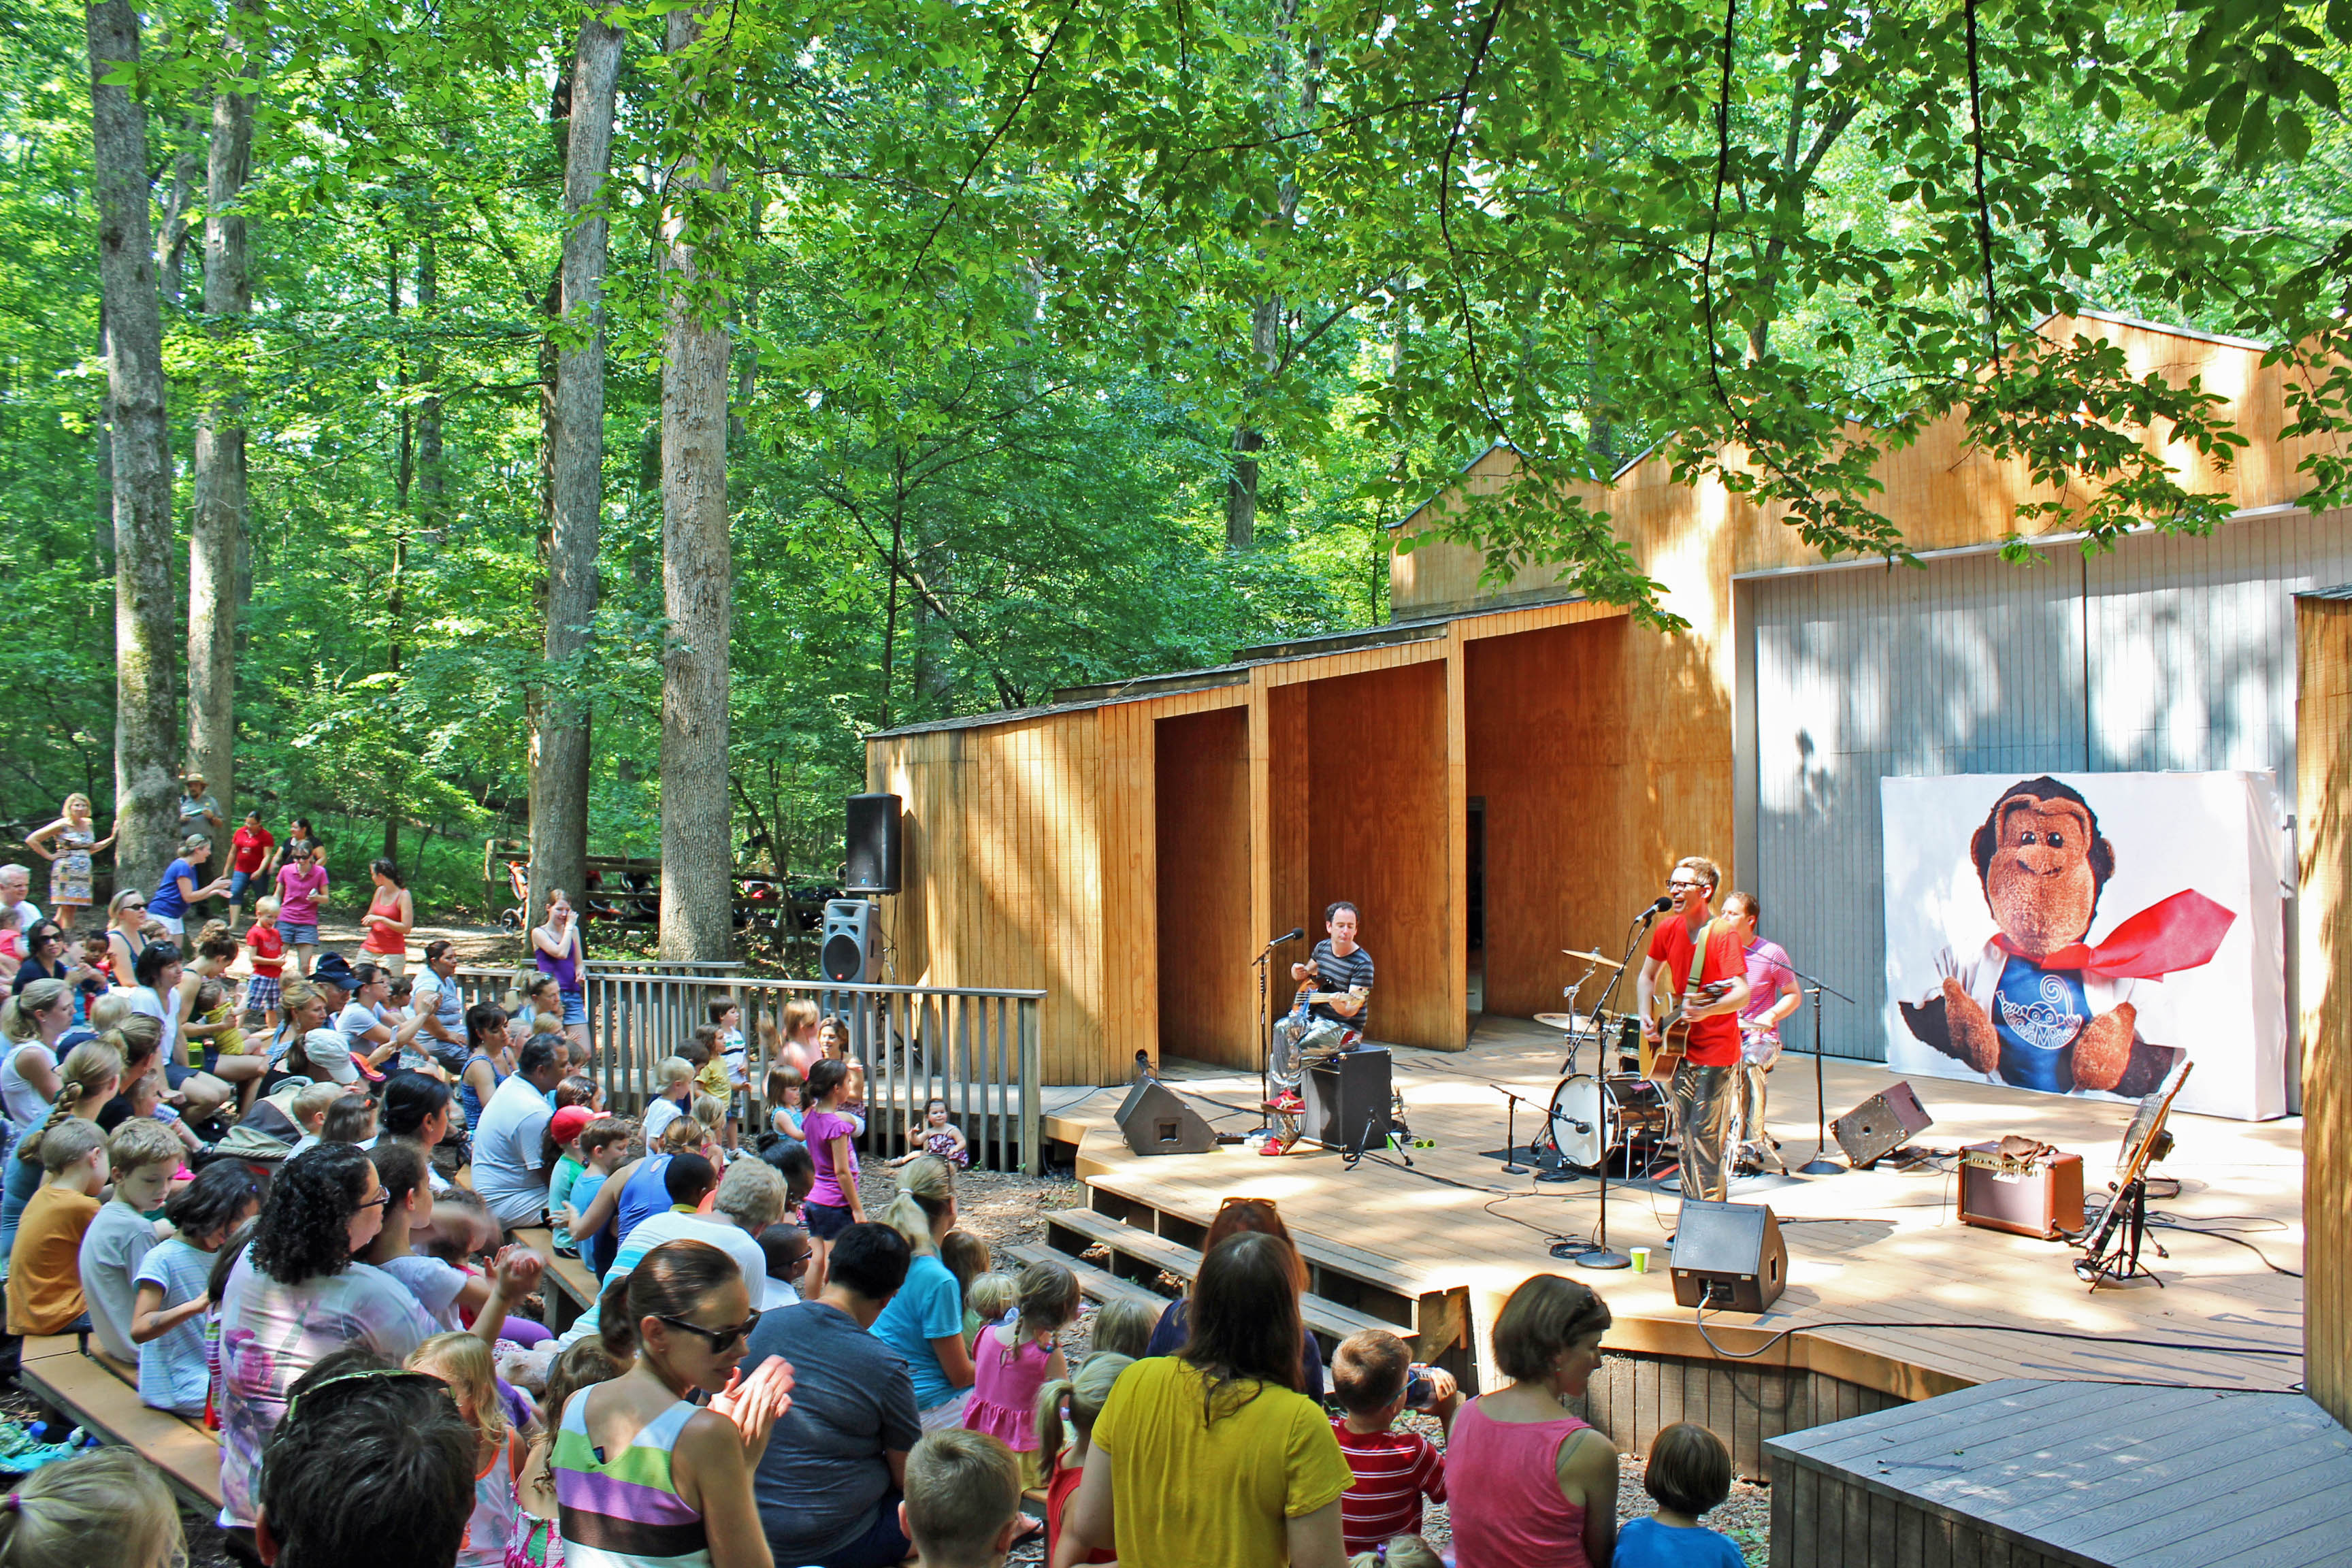 Sold out show at Theatre-in-the-Woods